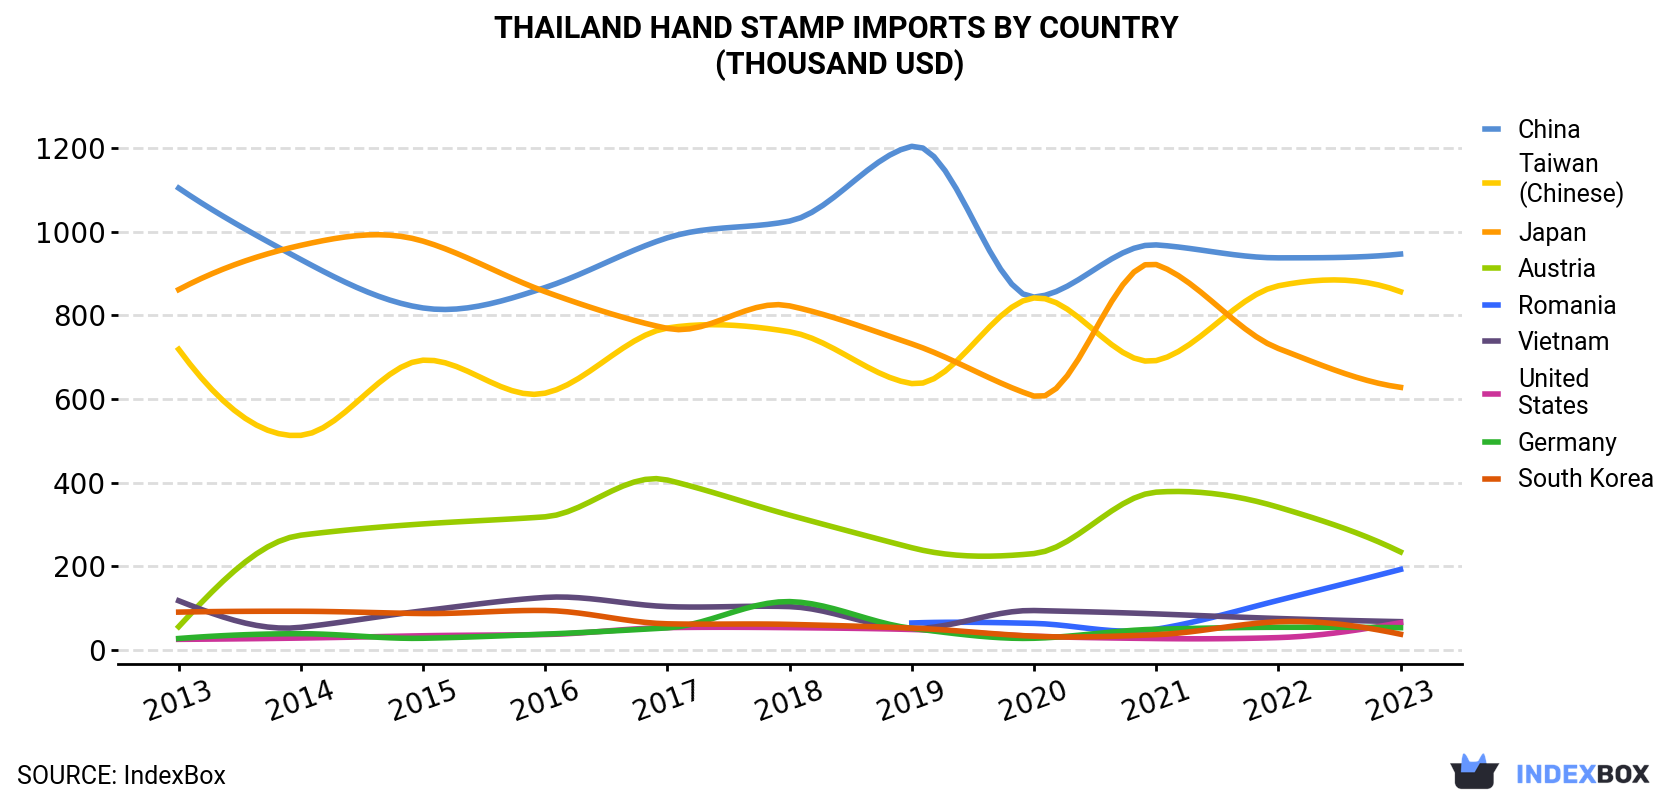 Thailand Hand Stamp Imports By Country (Thousand USD)